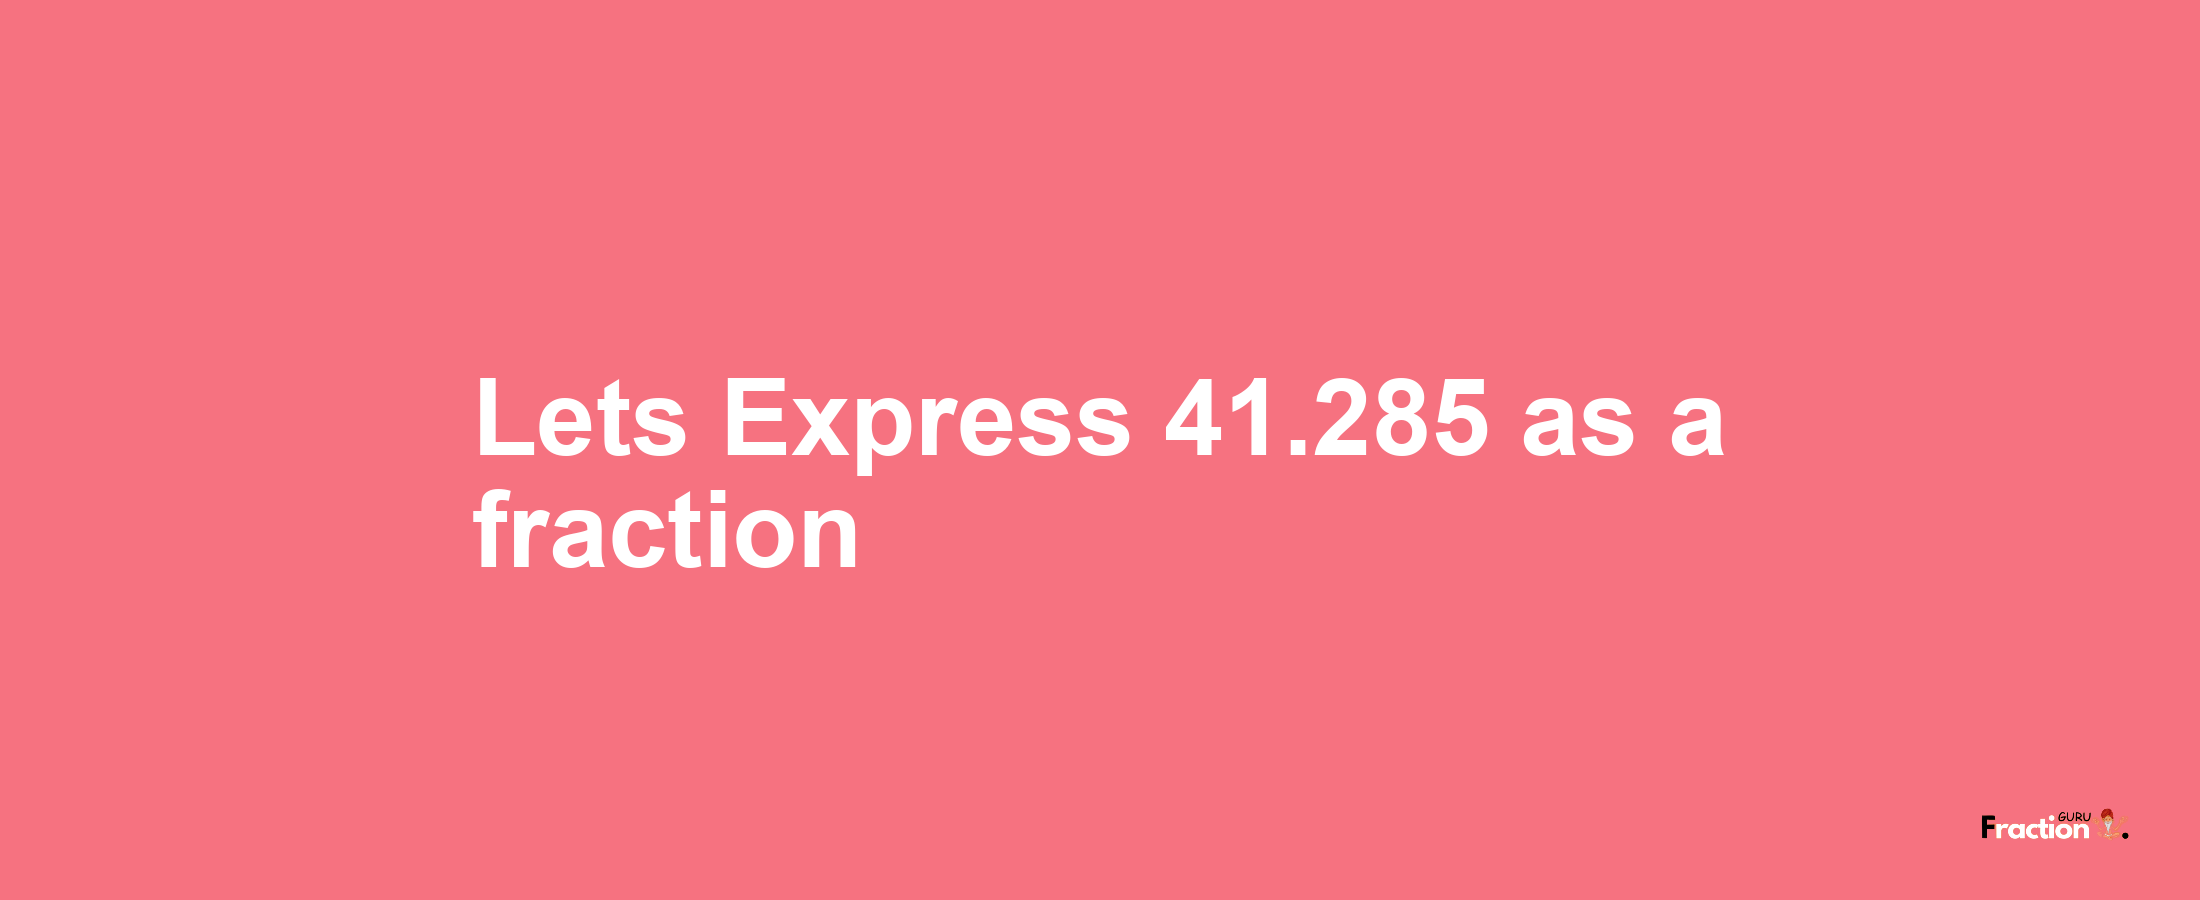 Lets Express 41.285 as afraction